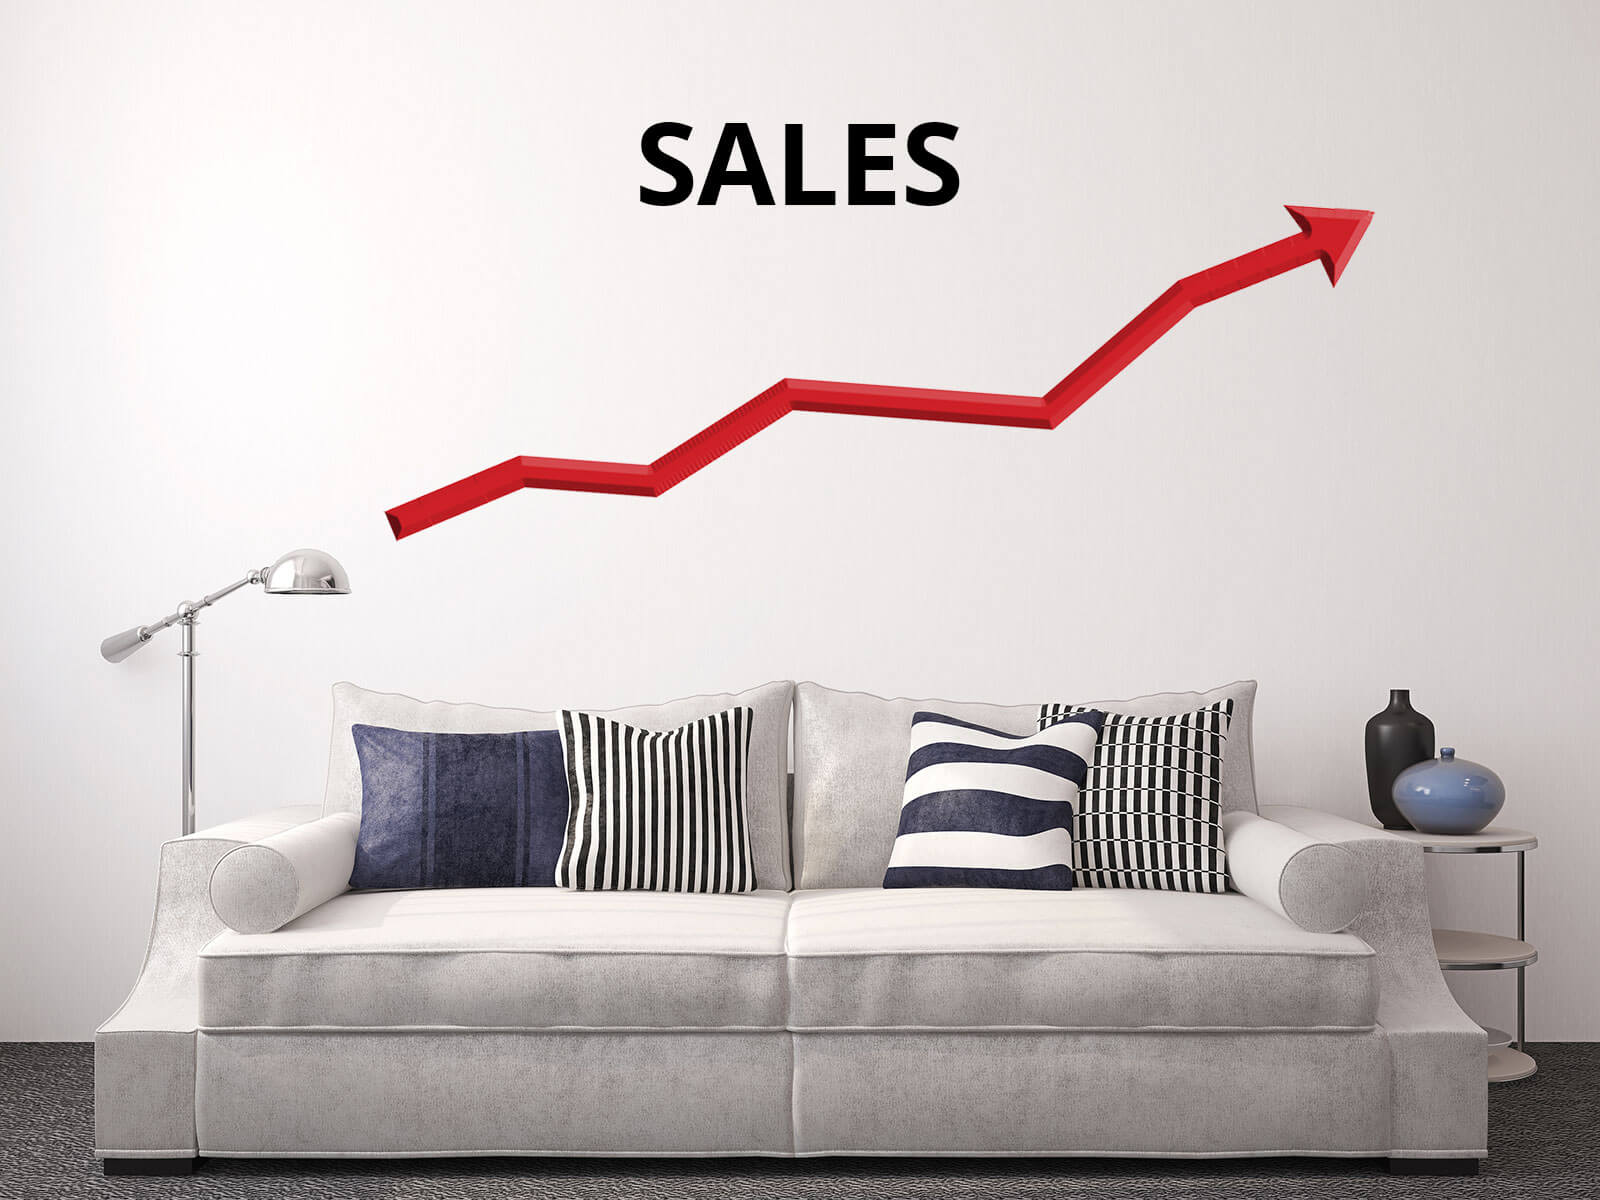 Image showing Home decor, interior design, and home furnishings industry sales growing